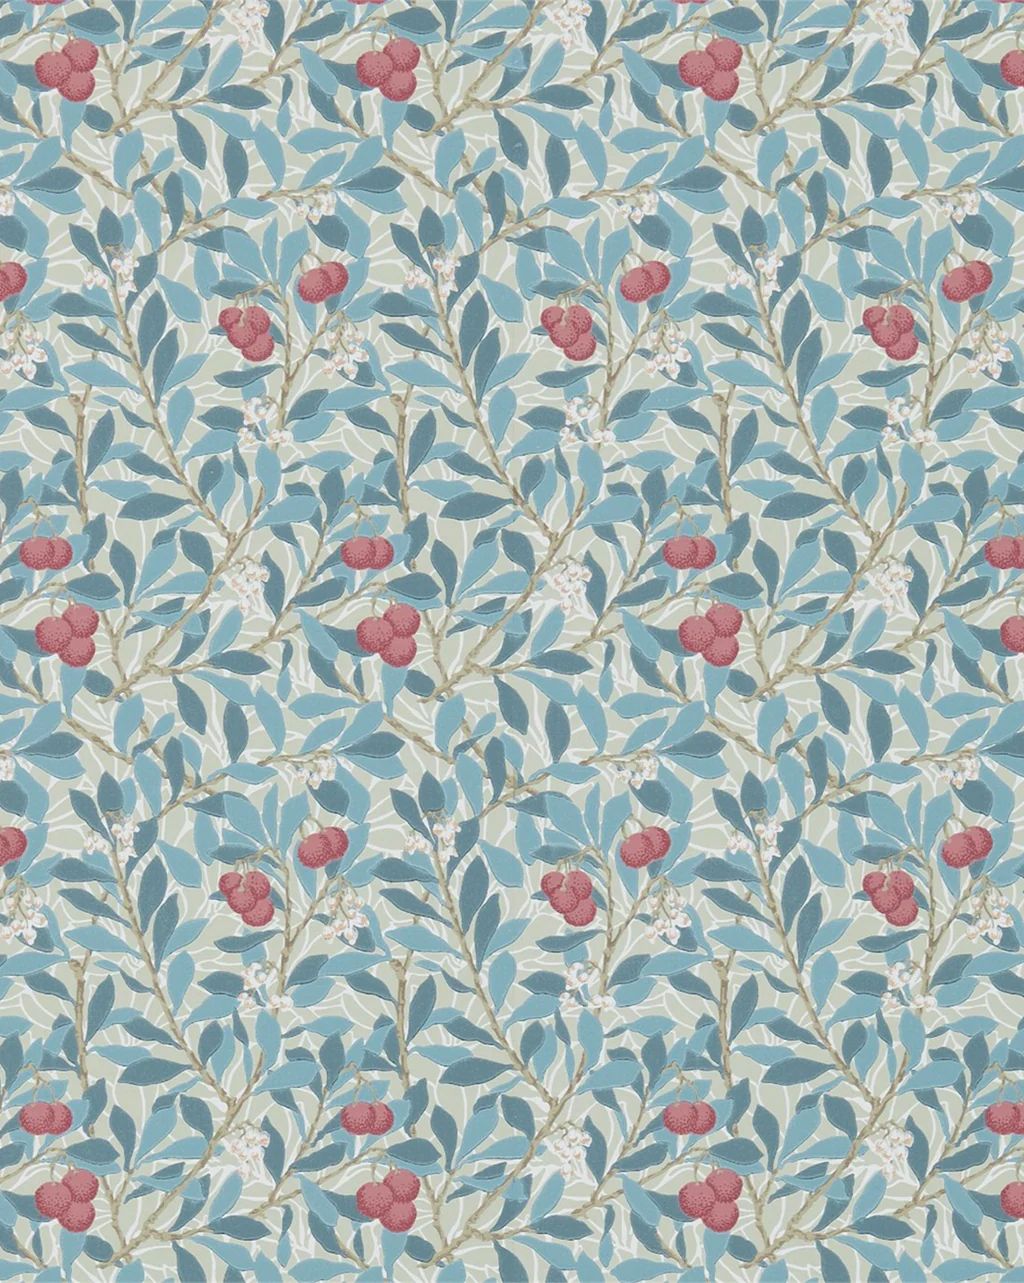 Arbutus Wallpaper By Morris & Co. | McGee & Co.